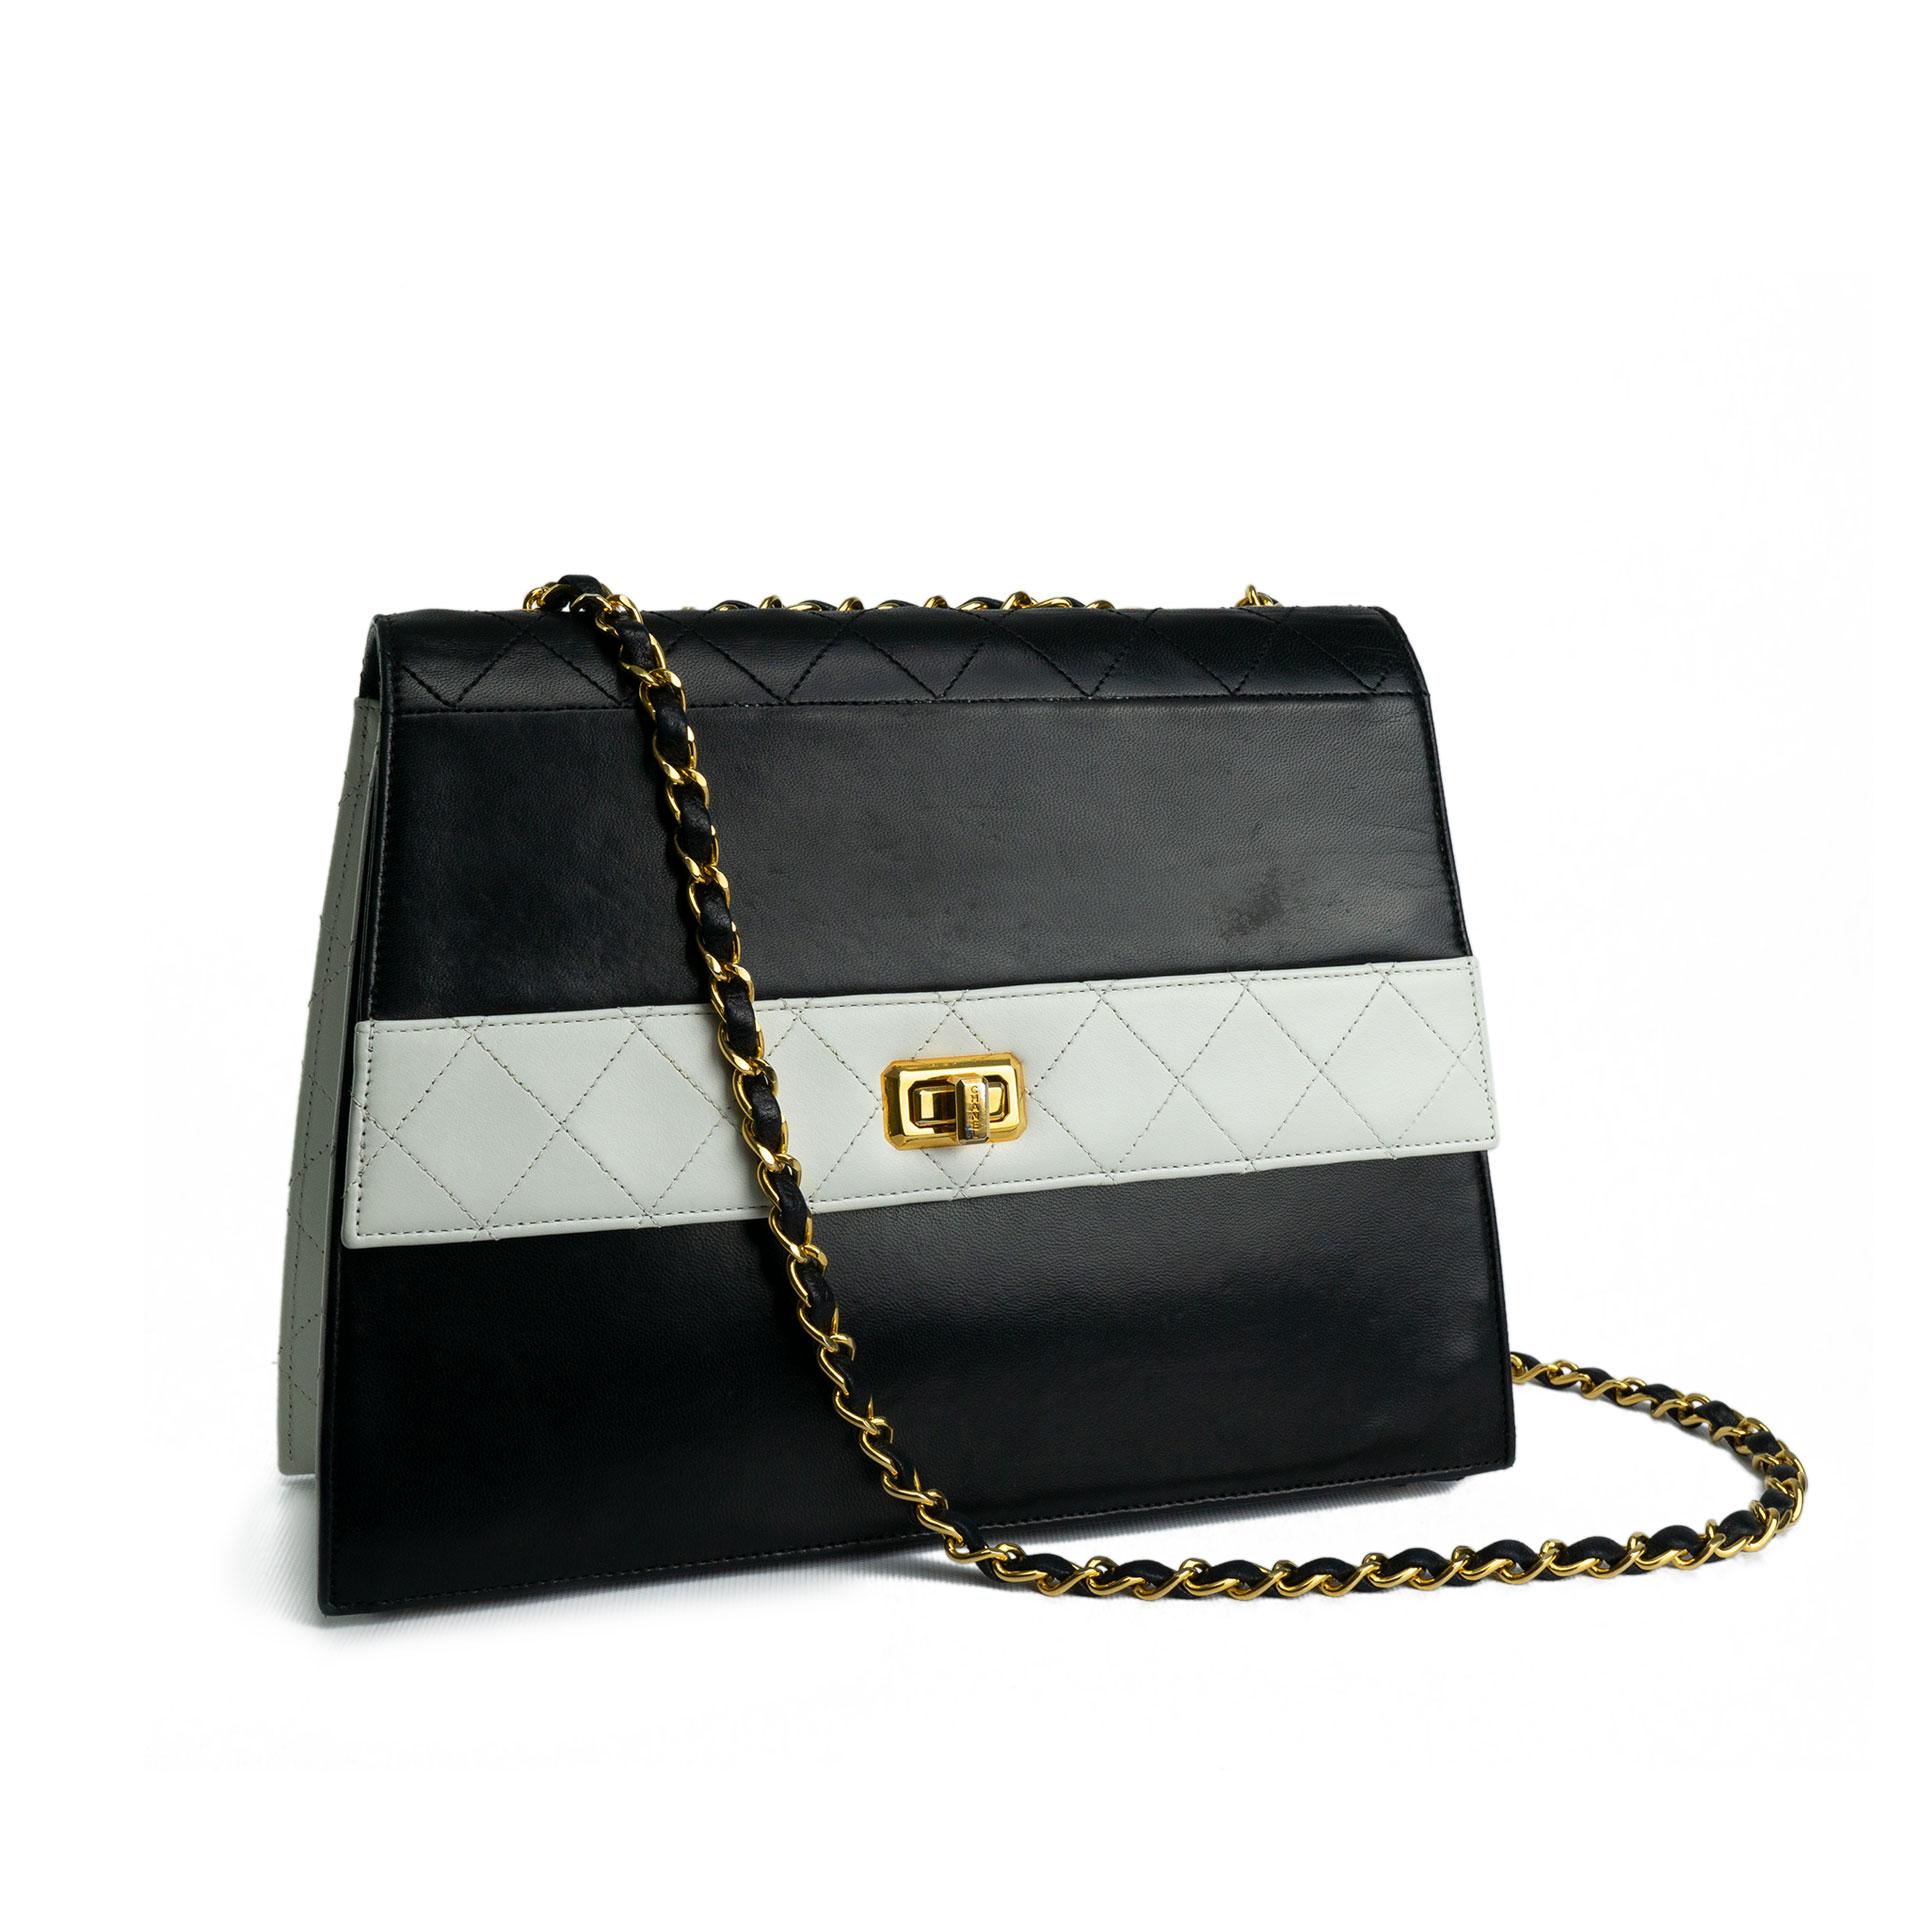 Chanel 1989 Two Tone Black and White Vintage Flap Bag For Sale 7